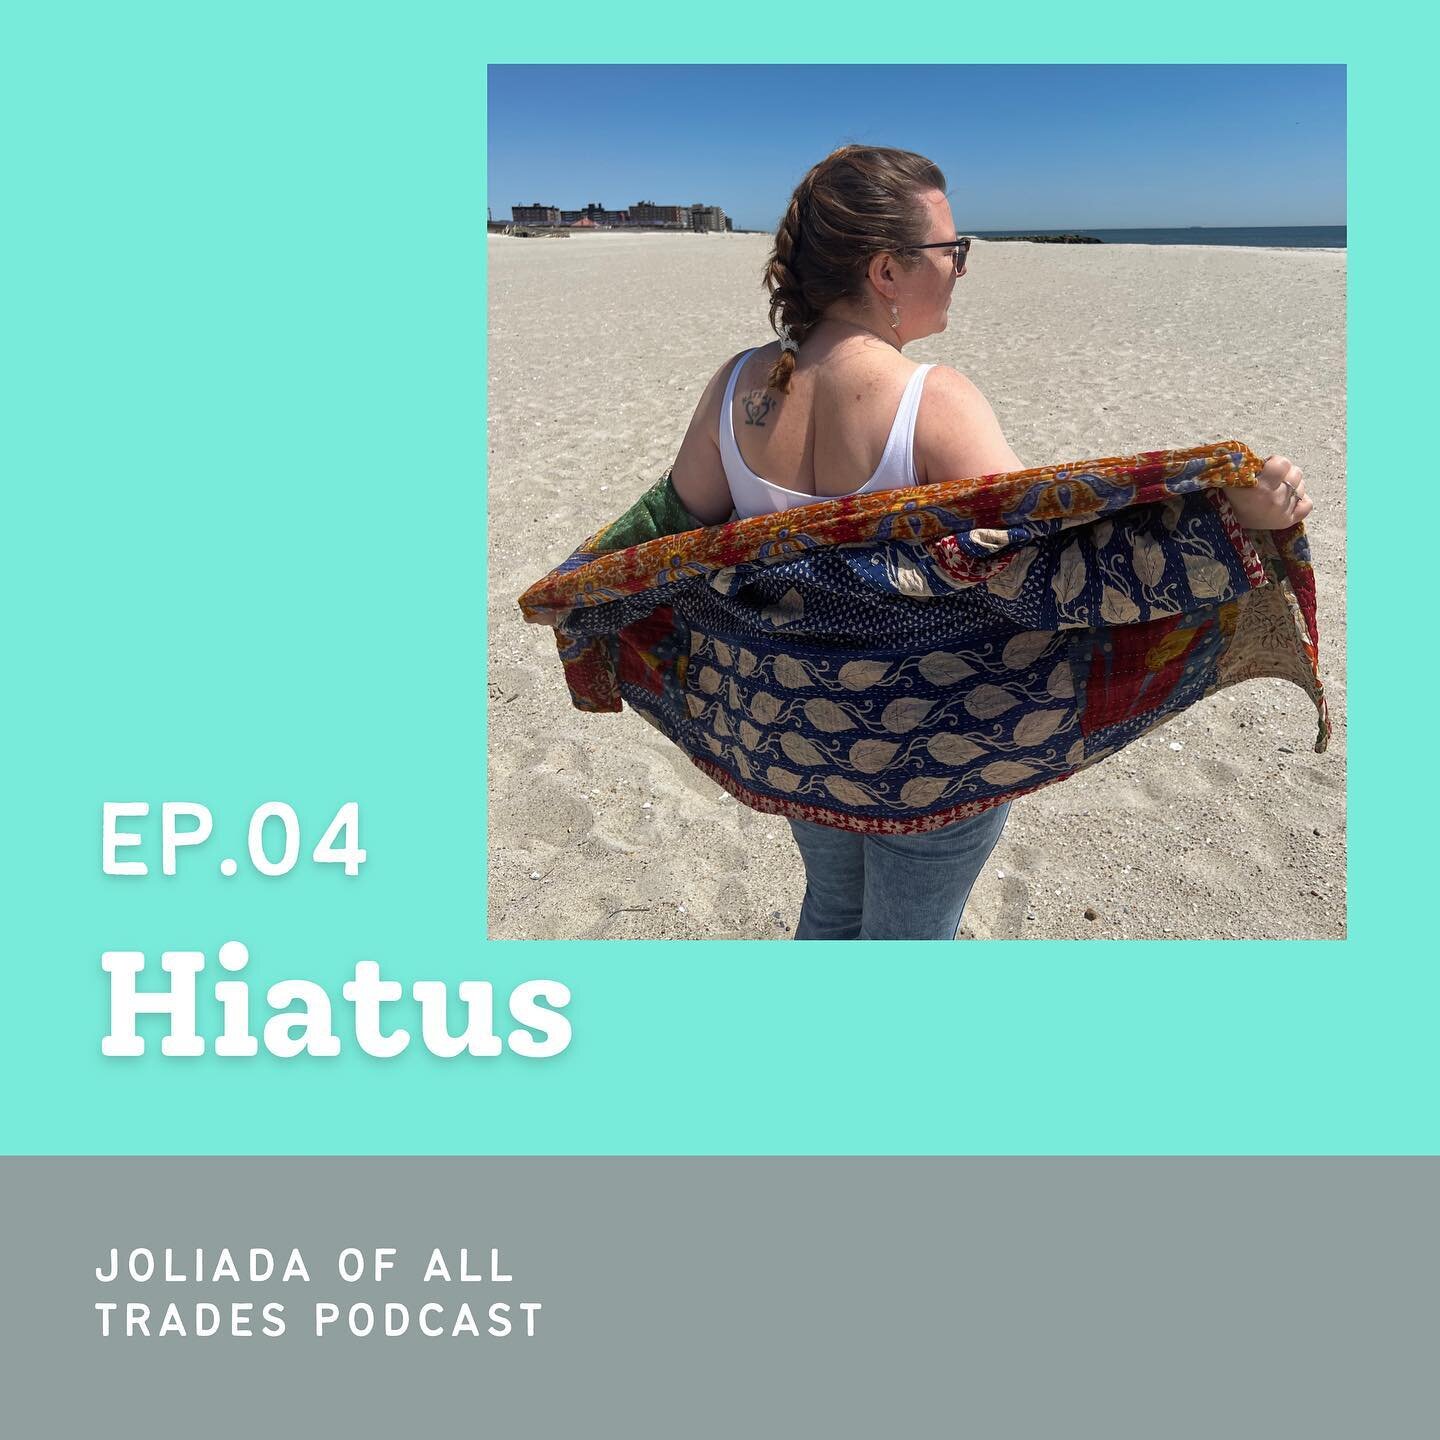 Today's episode I talk about my unplanned hiatus from the podcast. How it came about, what I'm doing to feel more motivated &amp; a little bit about imposter syndrome. So if you've missed me as much as I've missed you, take a listen.

Small Biz Shout